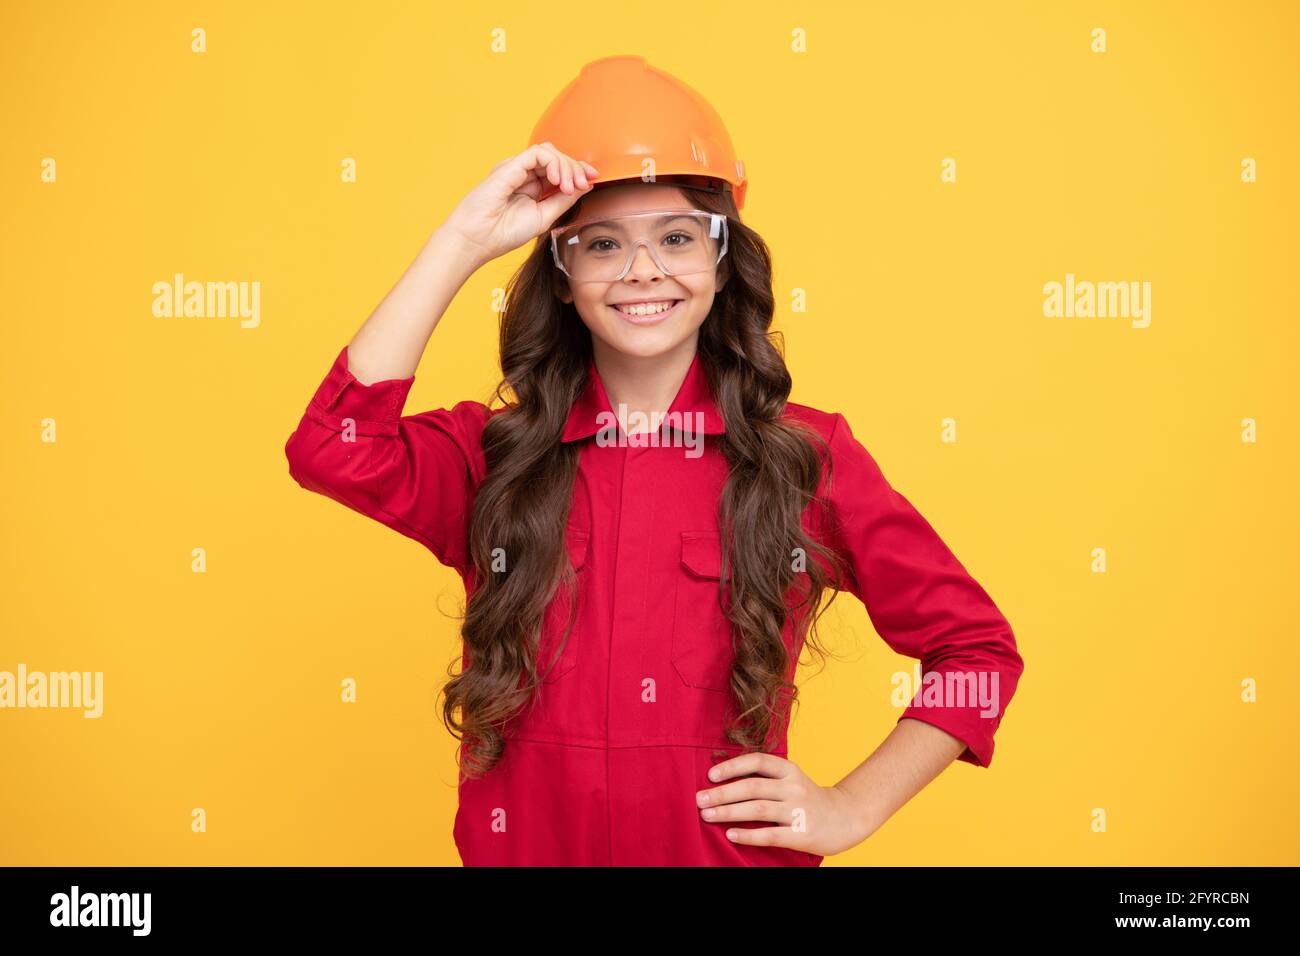 best service. kid future engineer on yellow background. safety glasses for repairing. labor day. Stock Photo